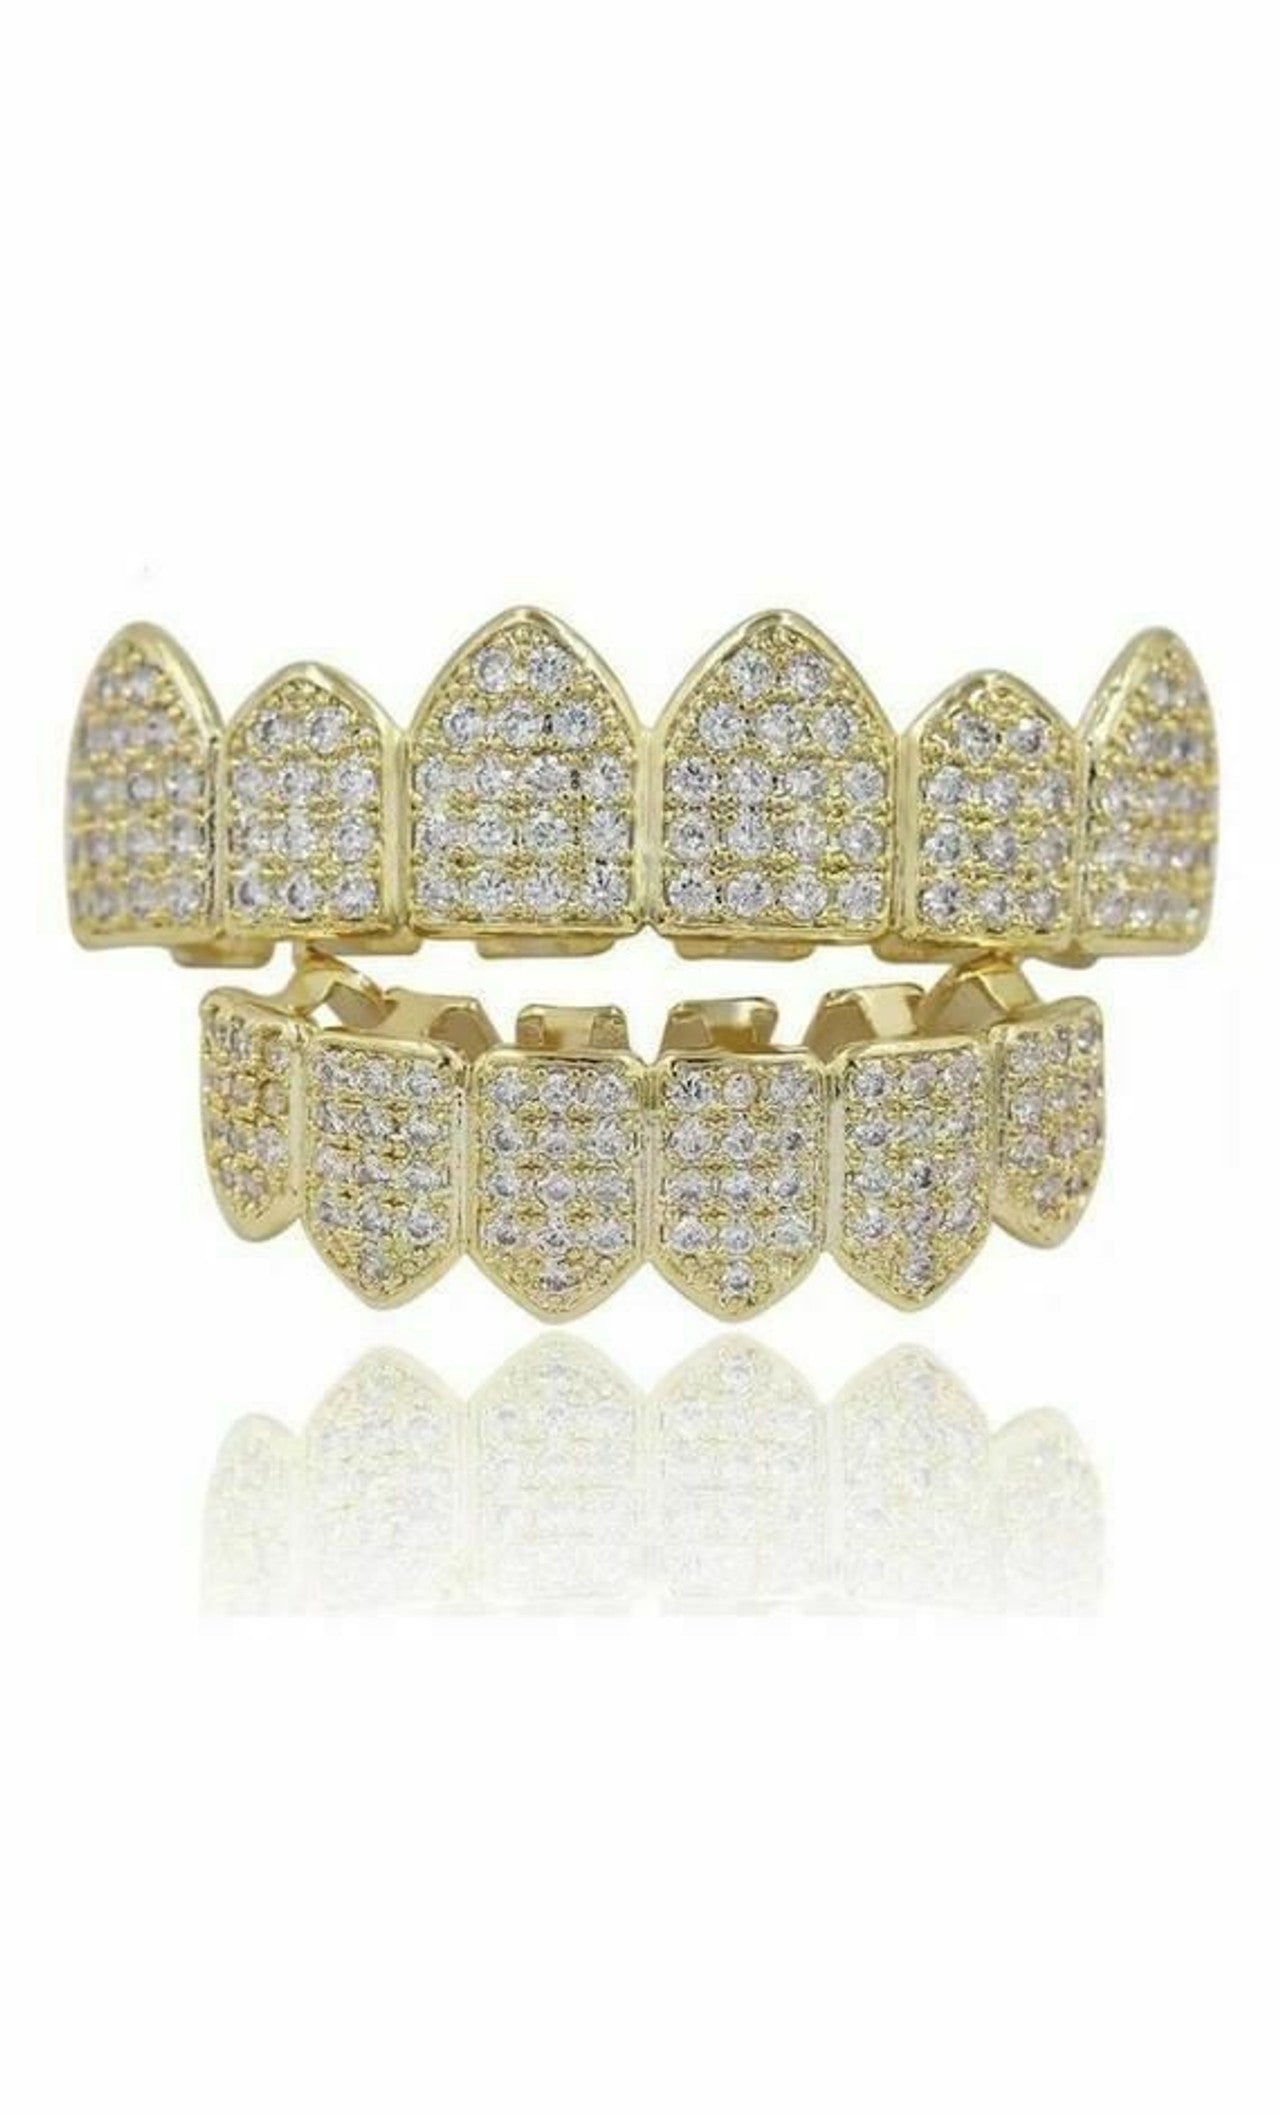 White Gold Over Fine SOLID 925 Silver CZ Diamond GRILLZ Teeth Top Bottom Hip Hop